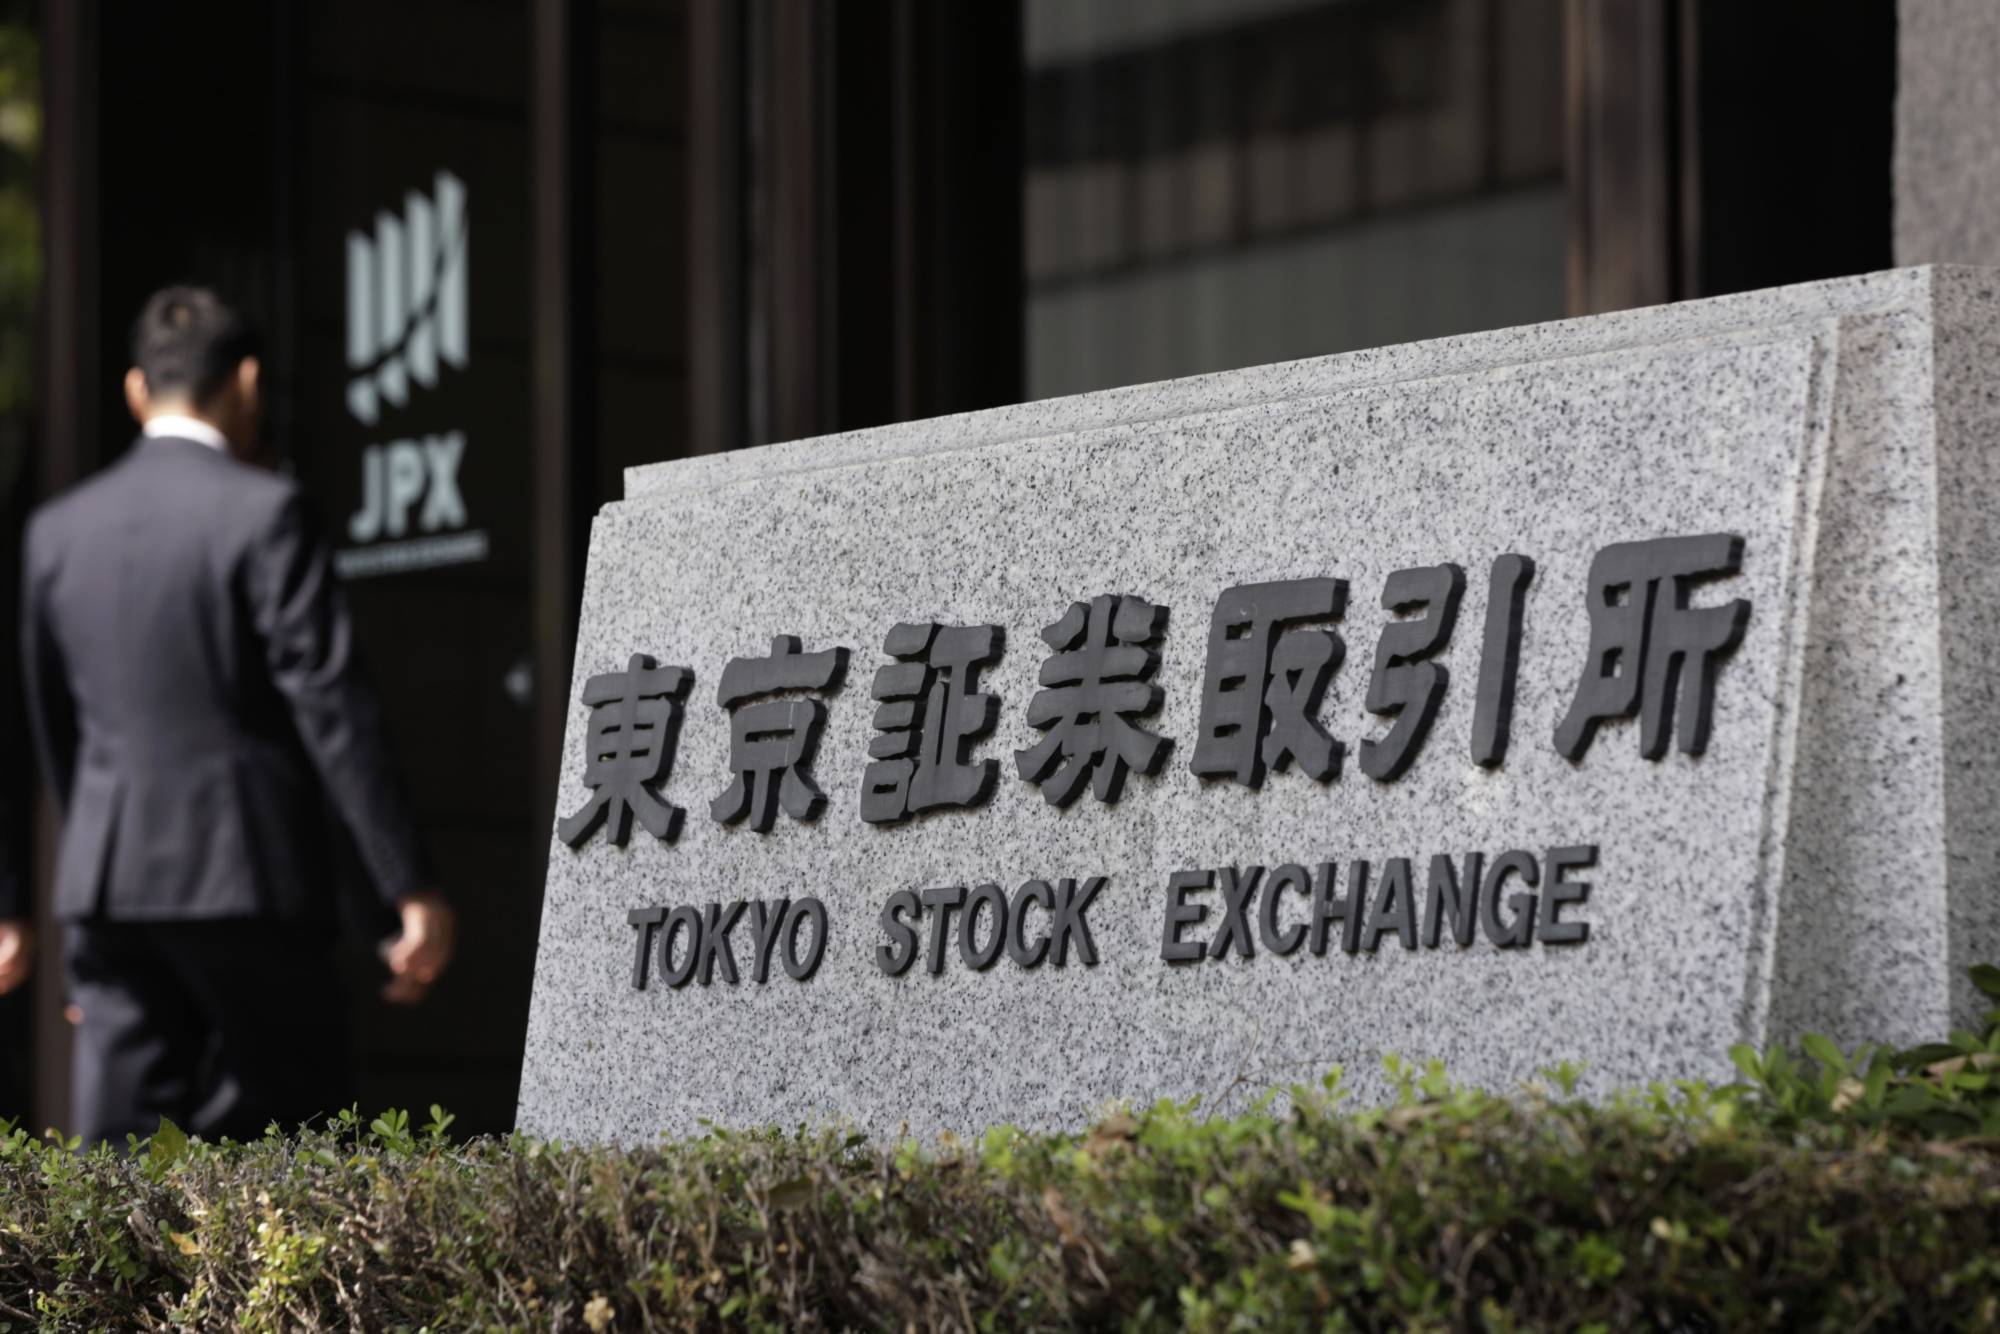 Next April, Japan's largest bourse, the Tokyo Stock Exchange, will reorganize its structure from the current four markets to three named Prime, Standard and Growth. | BLOOMBERG